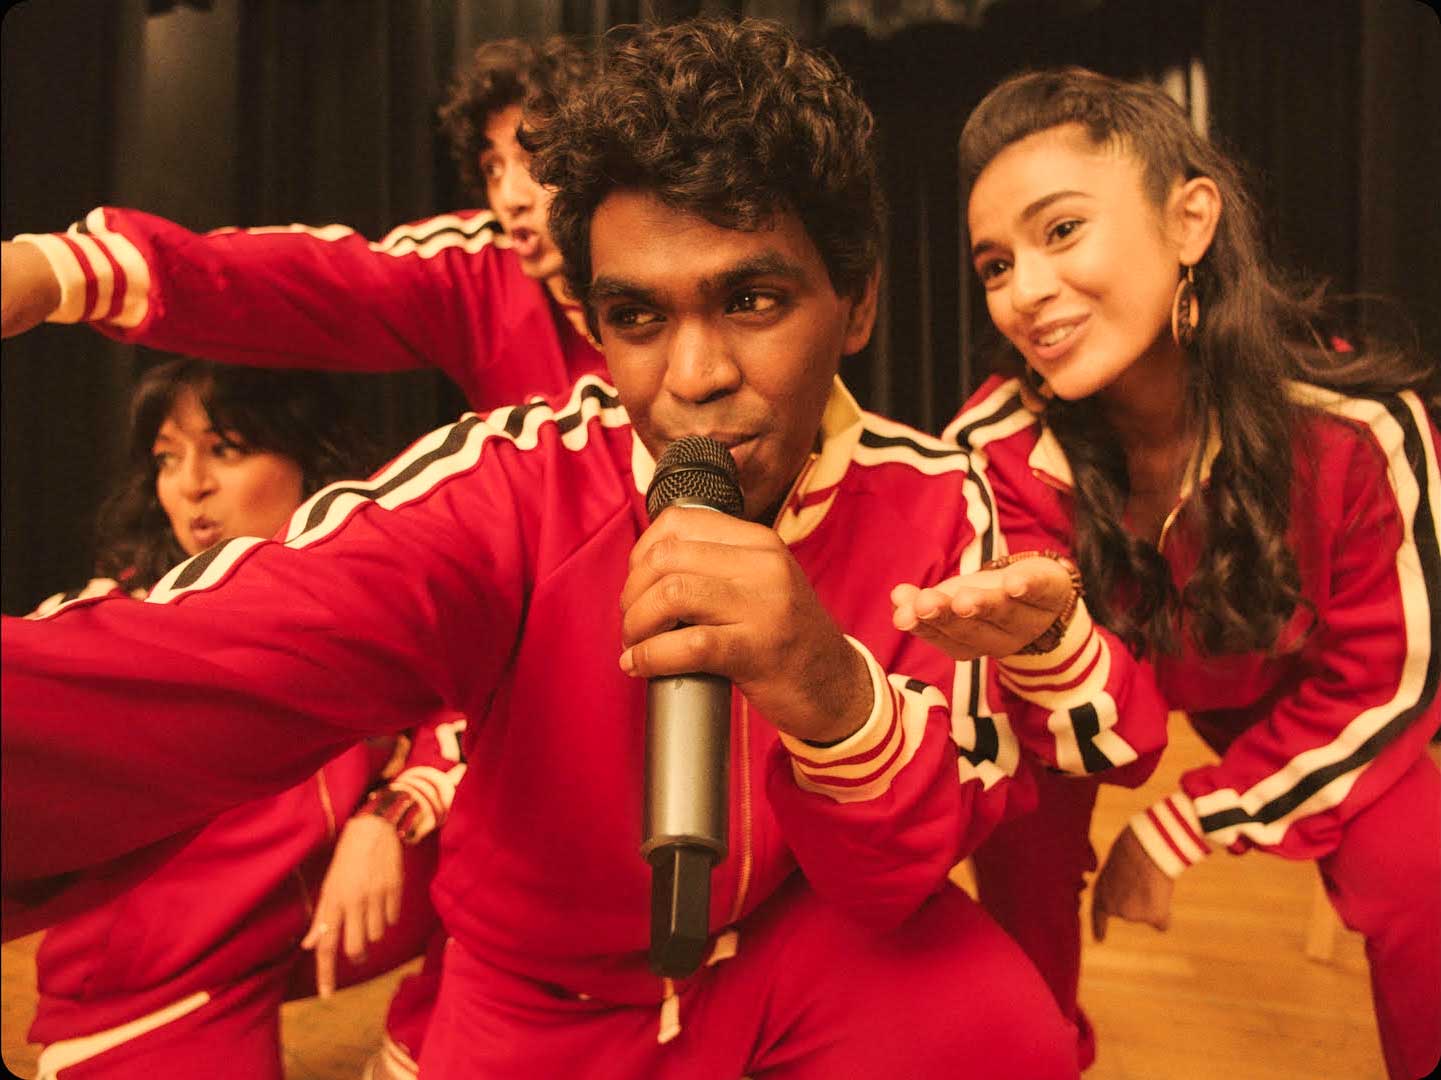 Young people in matching red tracksuits take the microphone to rap